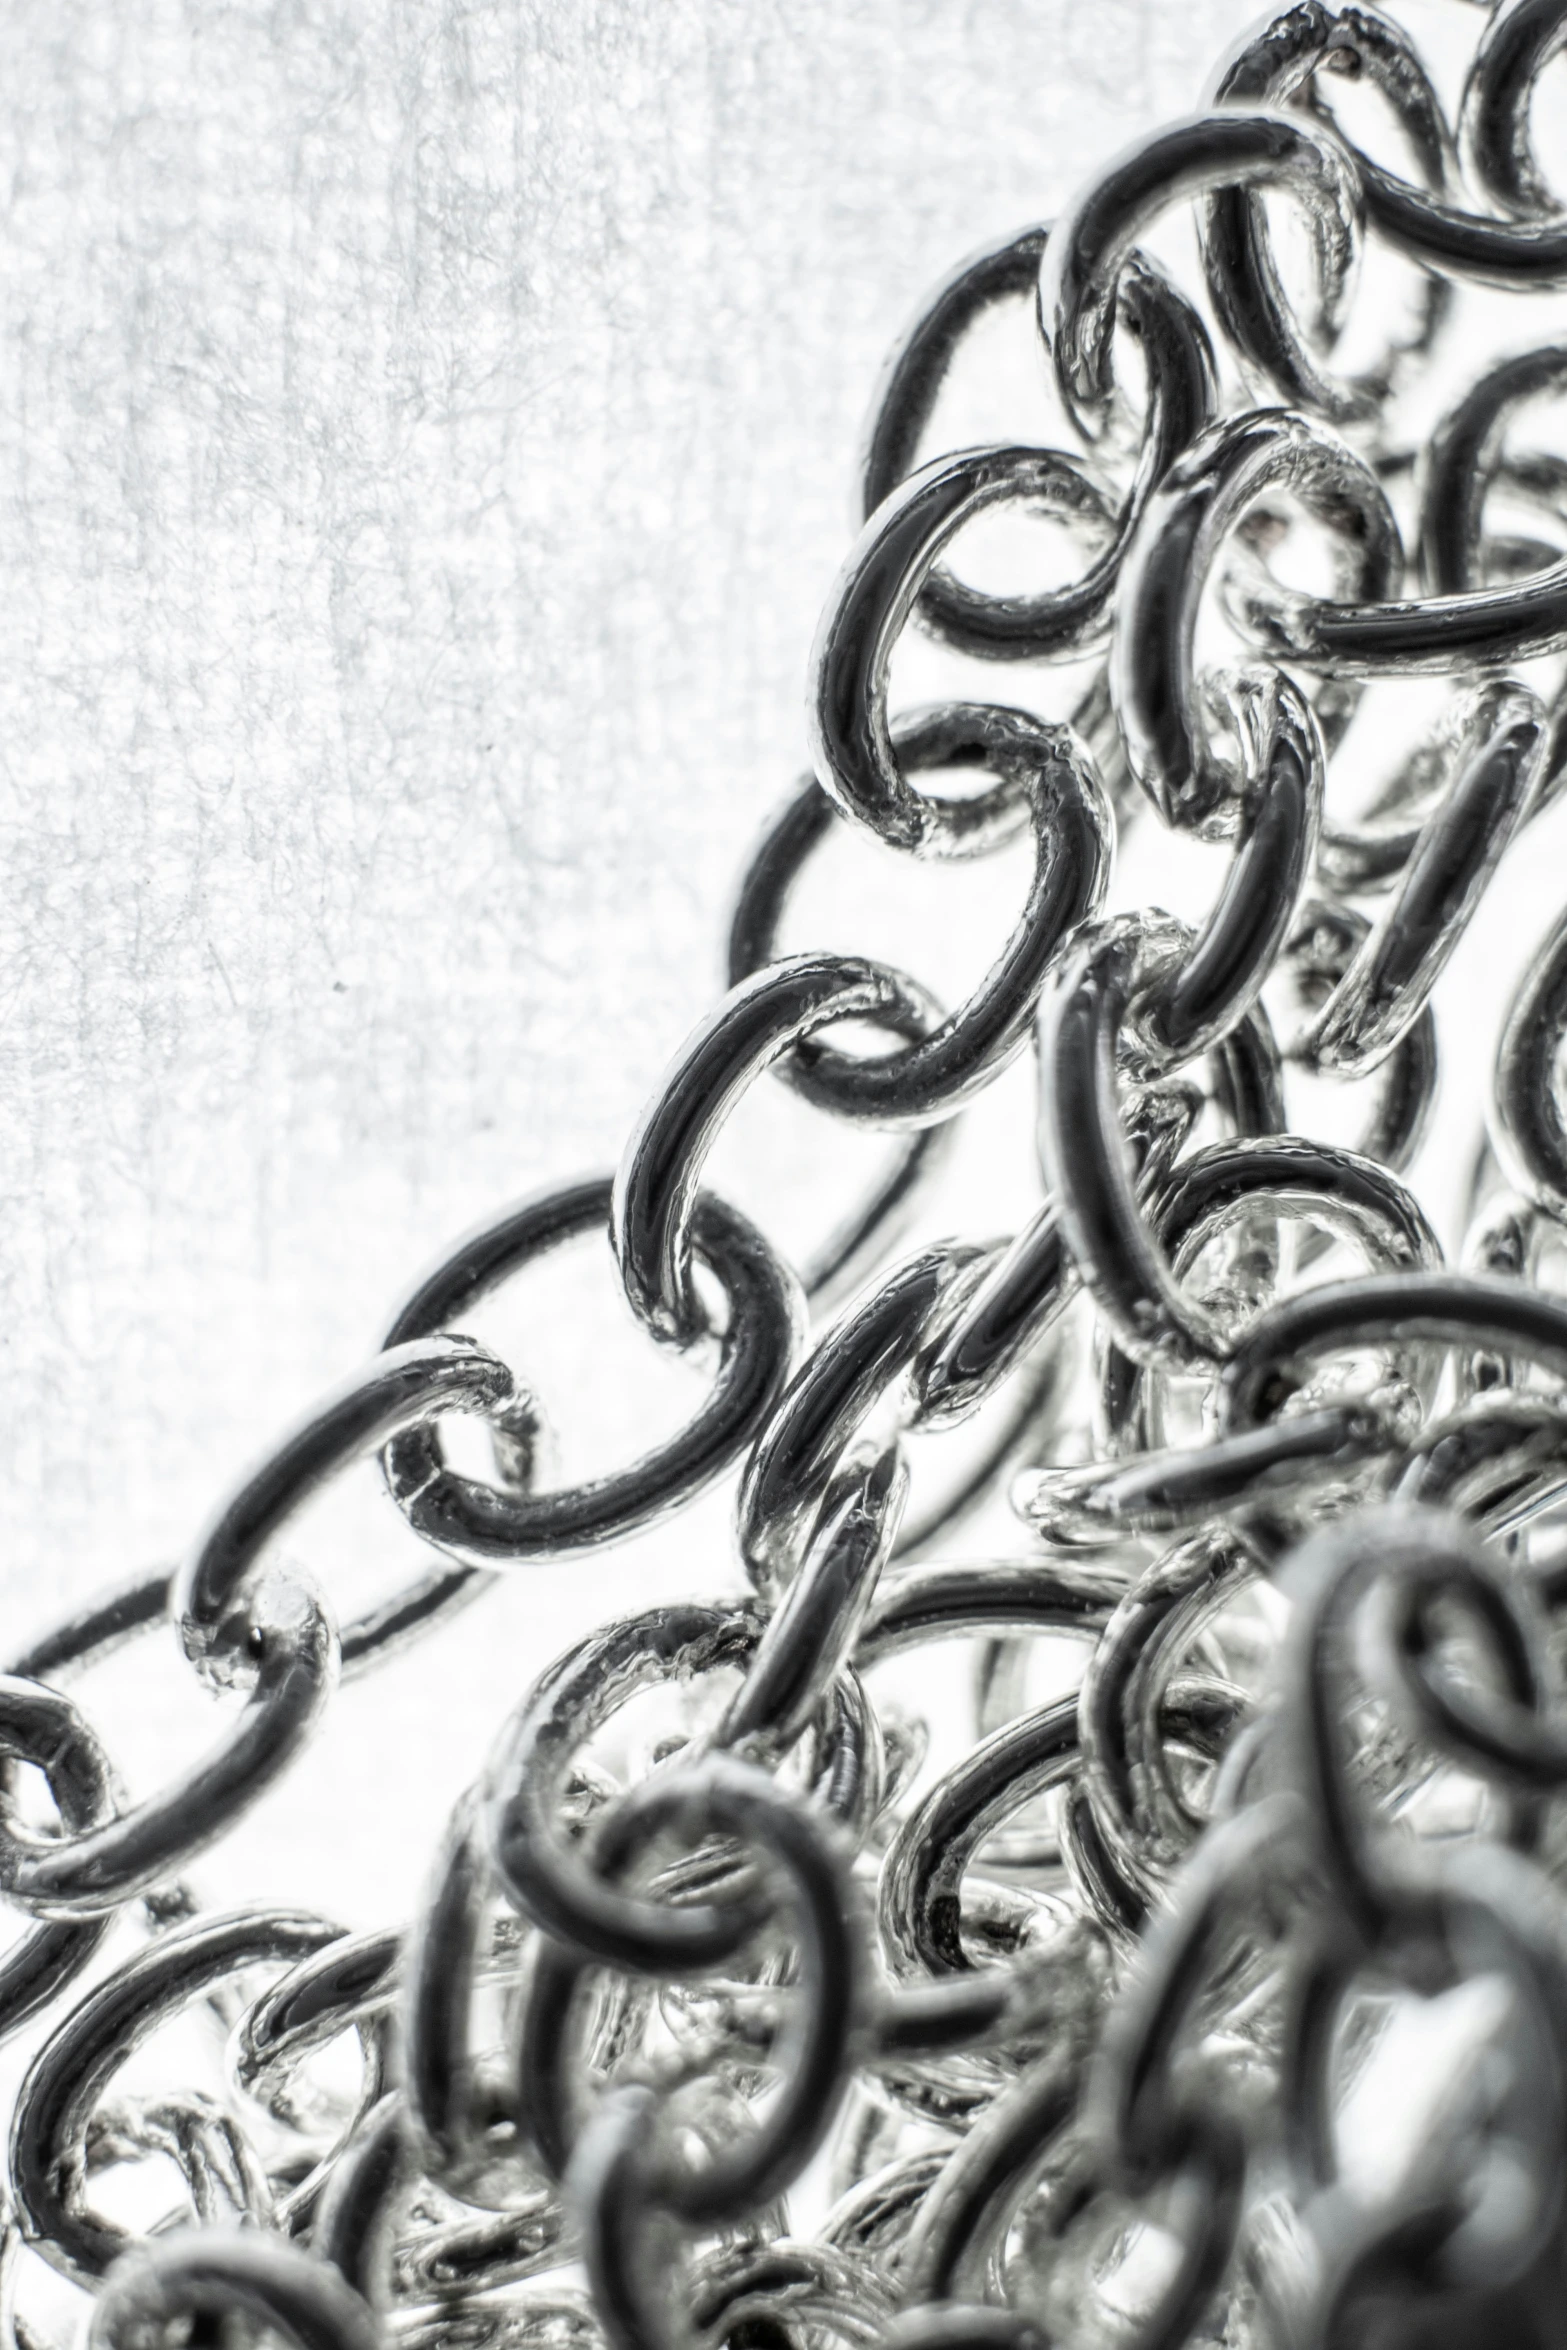 a close - up po shows the center of chains